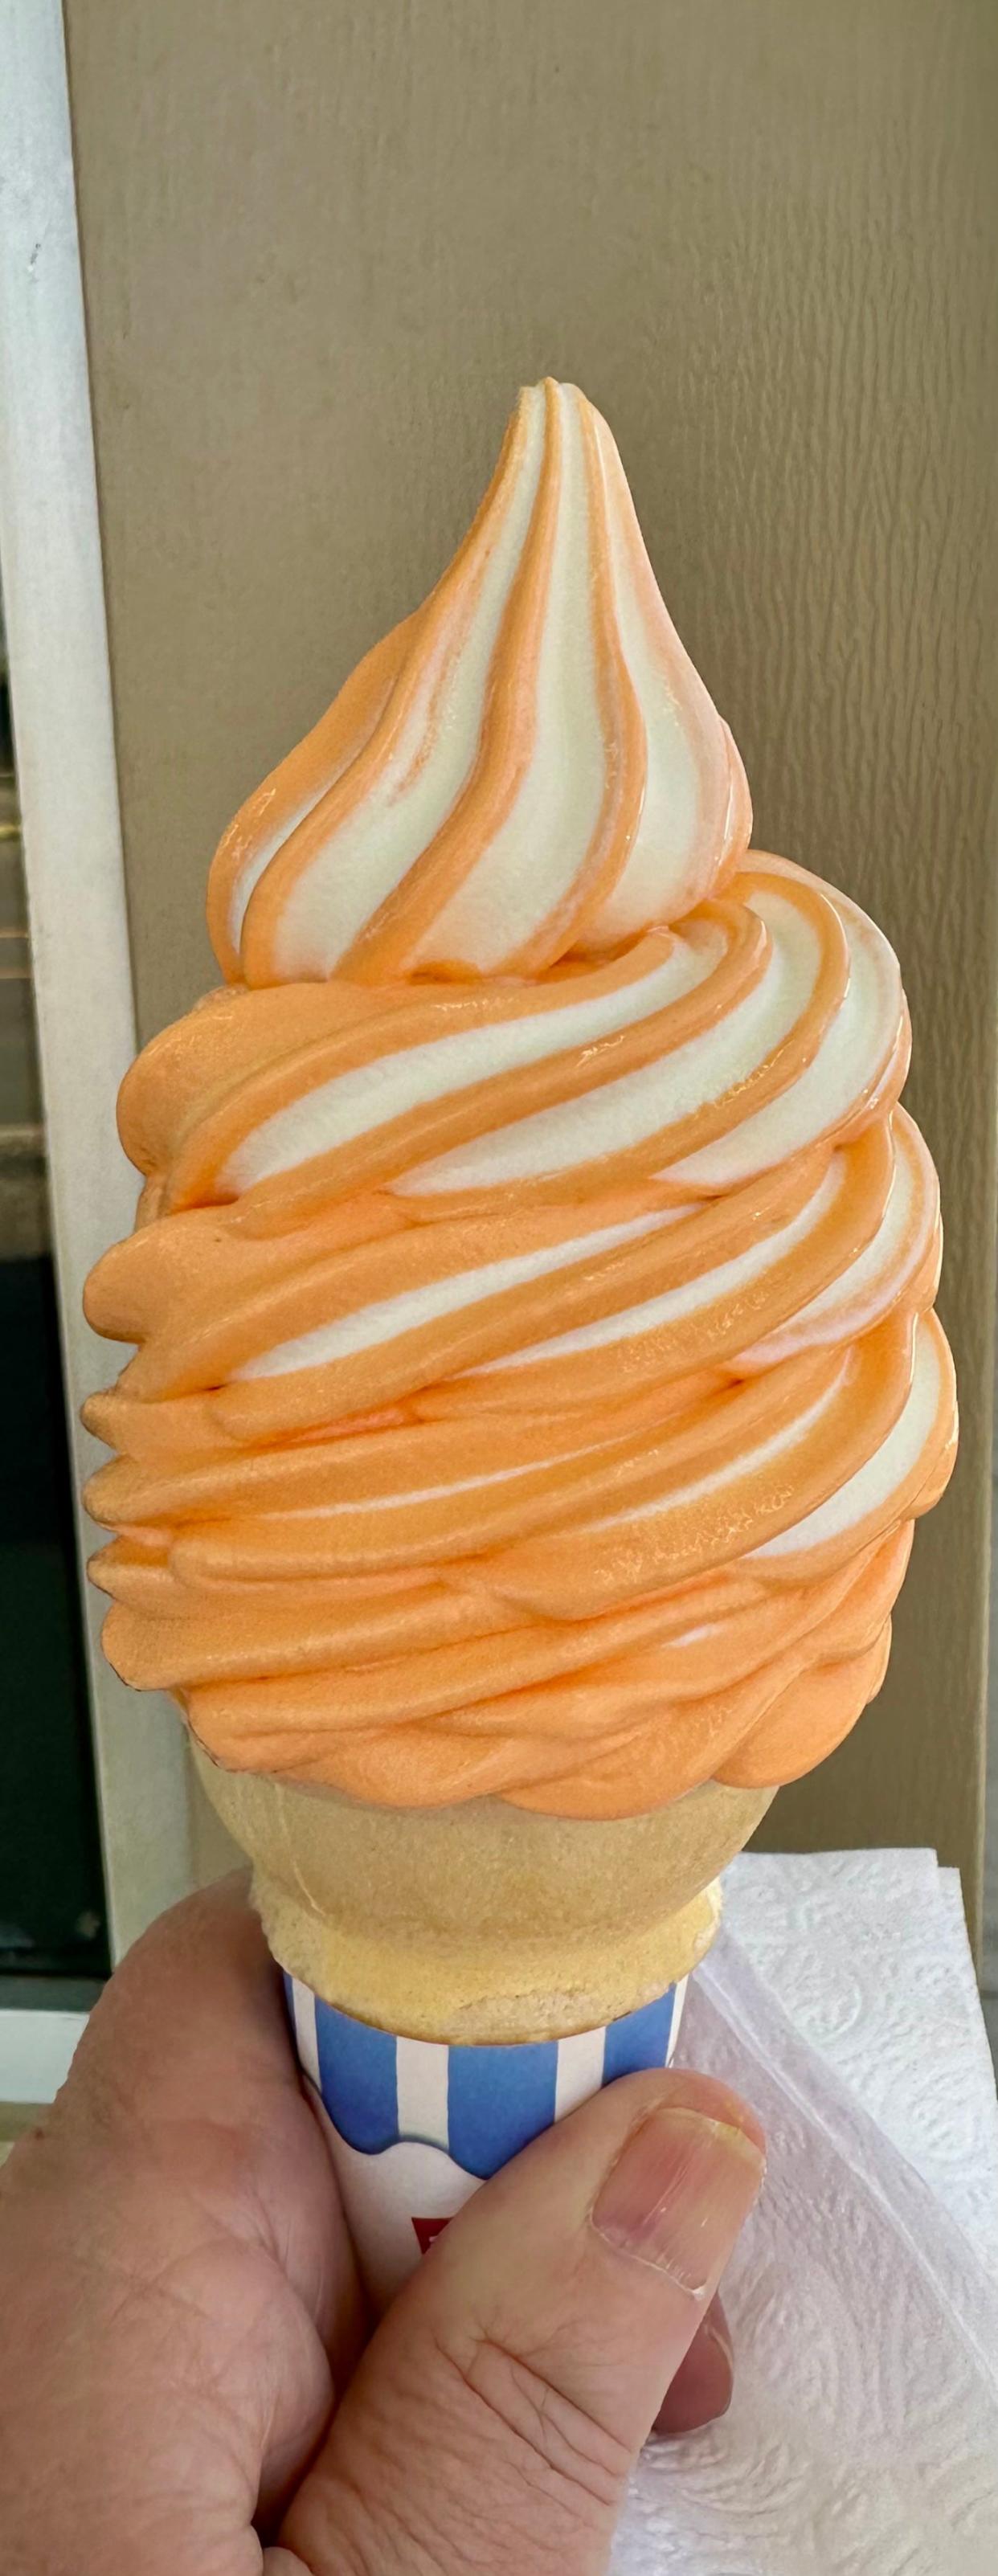 If you're looking for the flavor of an old-fashioned creamsicle, this twirled combo of vanilla and orange at Kustard Korner was the perfect hot weather refresher.